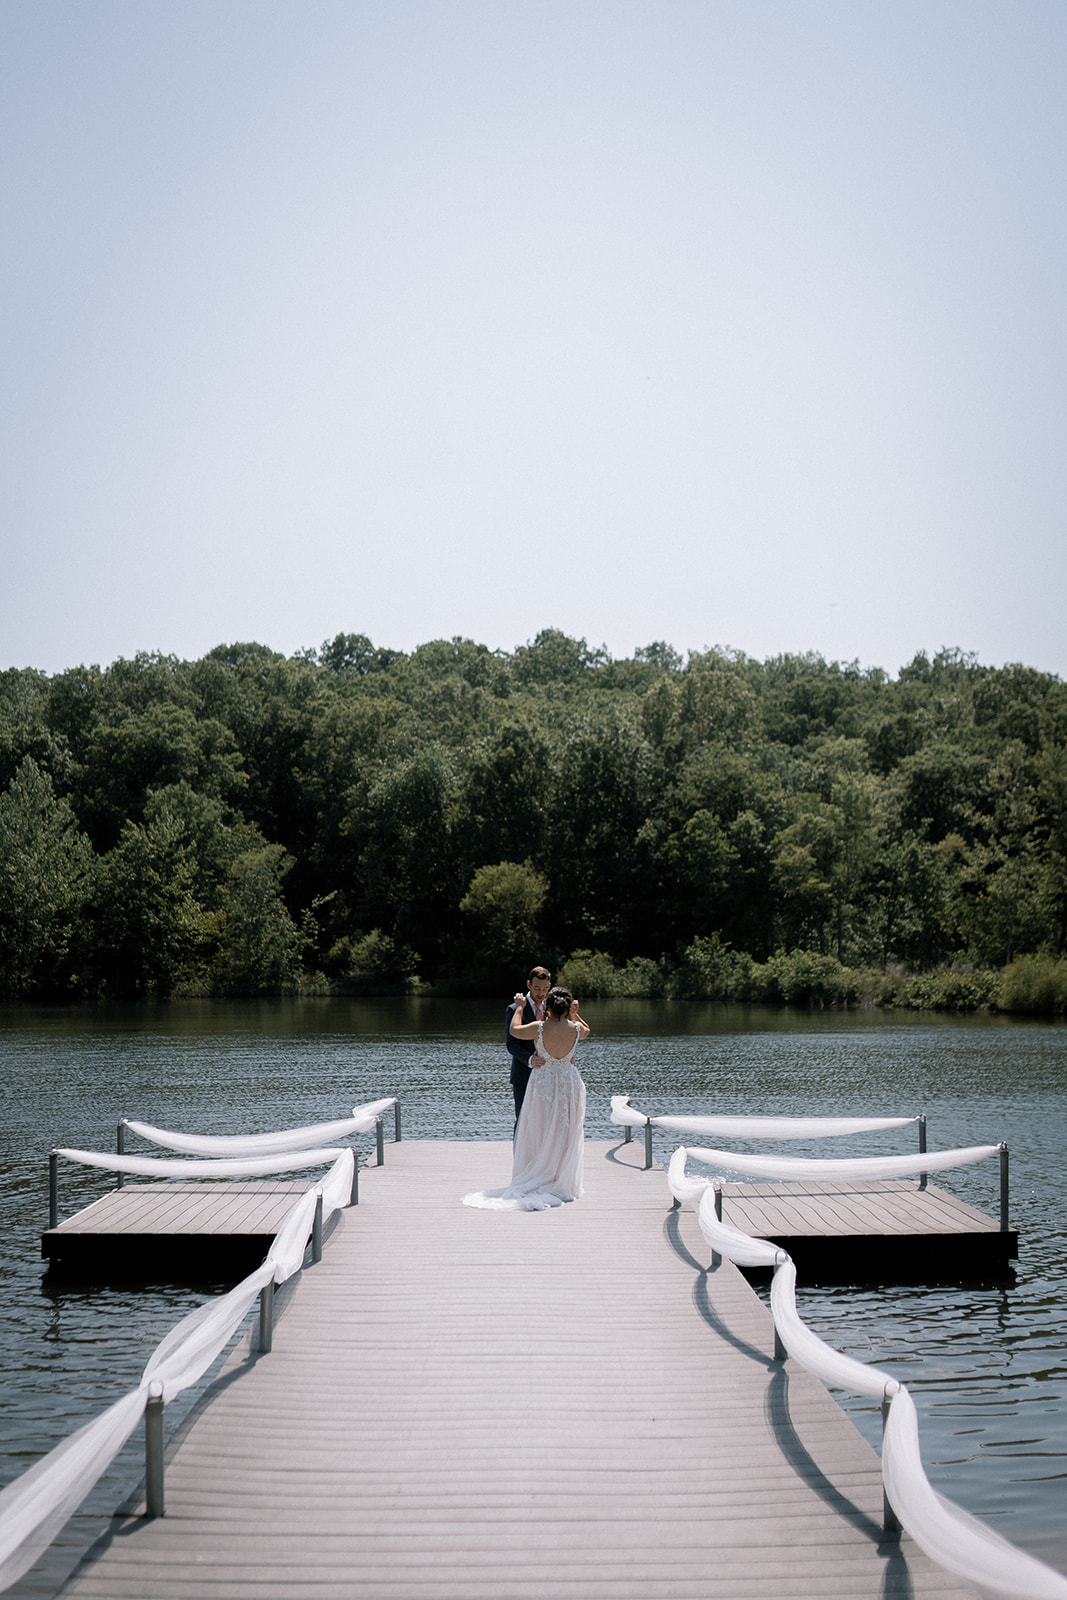 The Best Wedding Venues in St. Louis for Artsy Couples